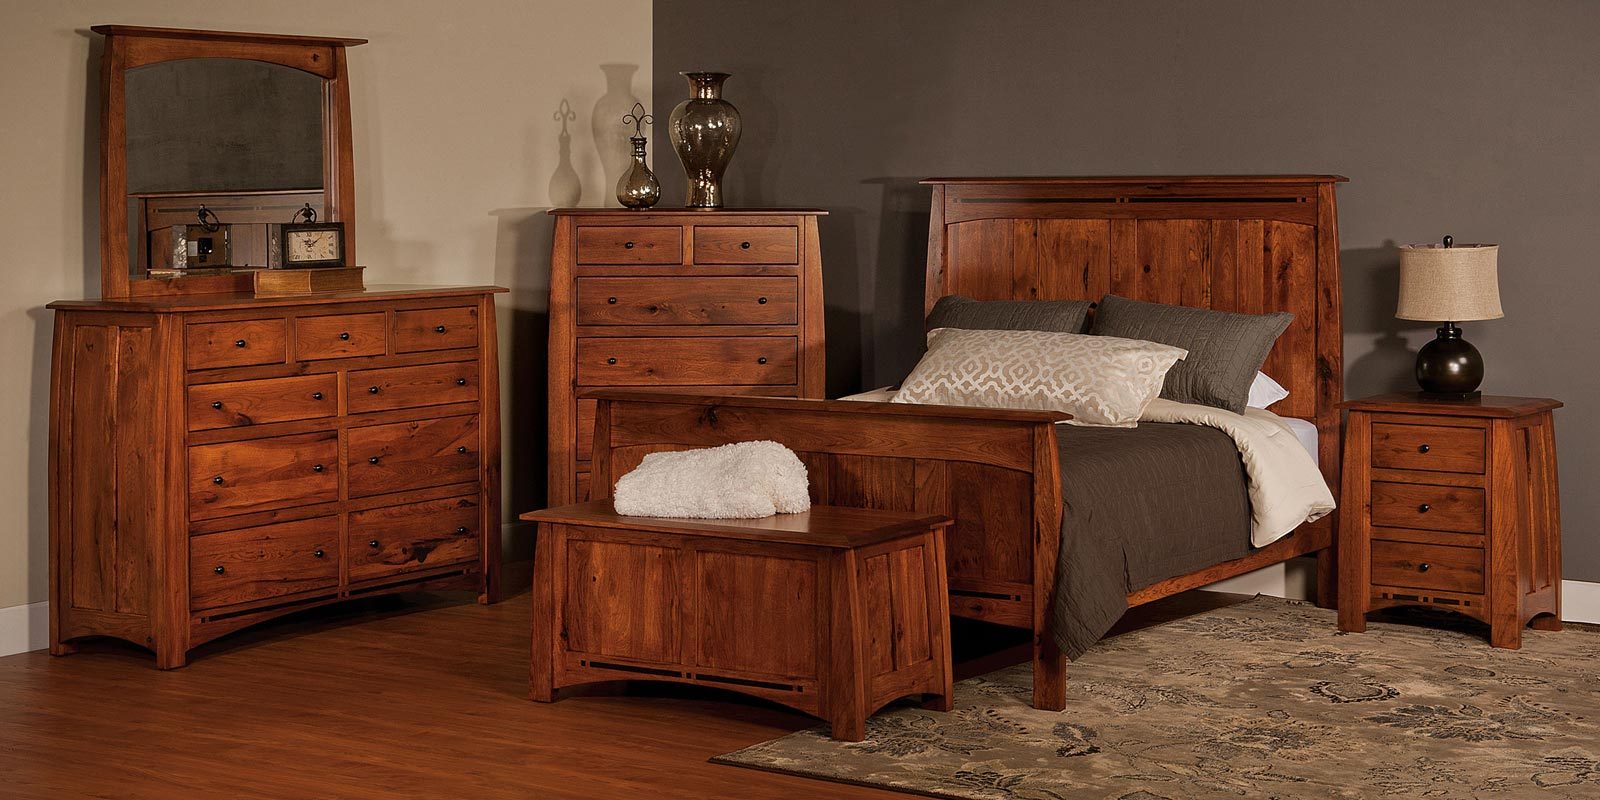 A bedroom set with a bed and a dresser